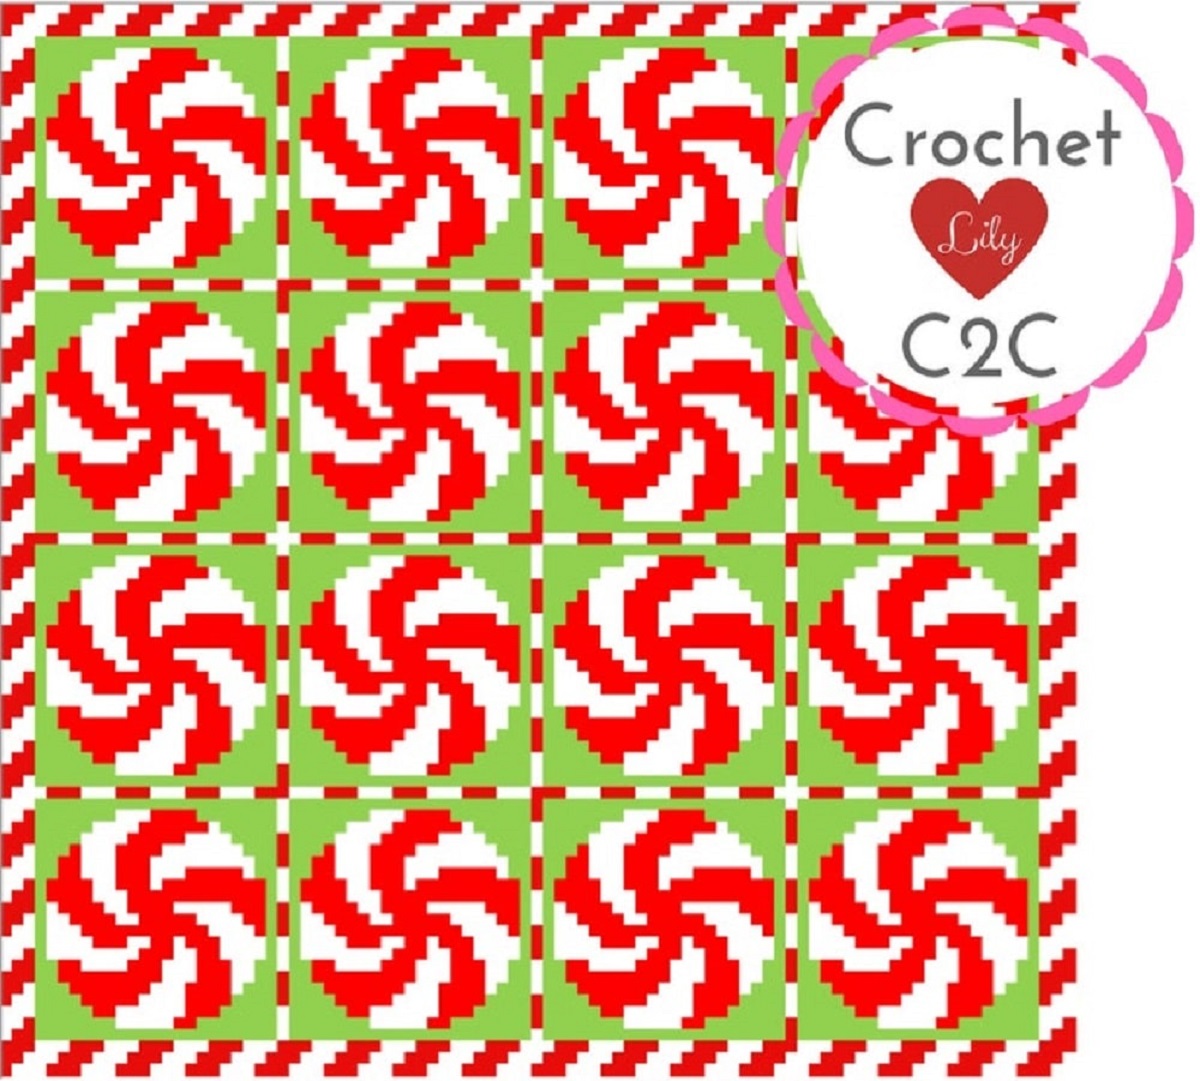 Pixelated style crochet blanket with red and white swirled in little squares and a red and white candy cane trim on all sides.